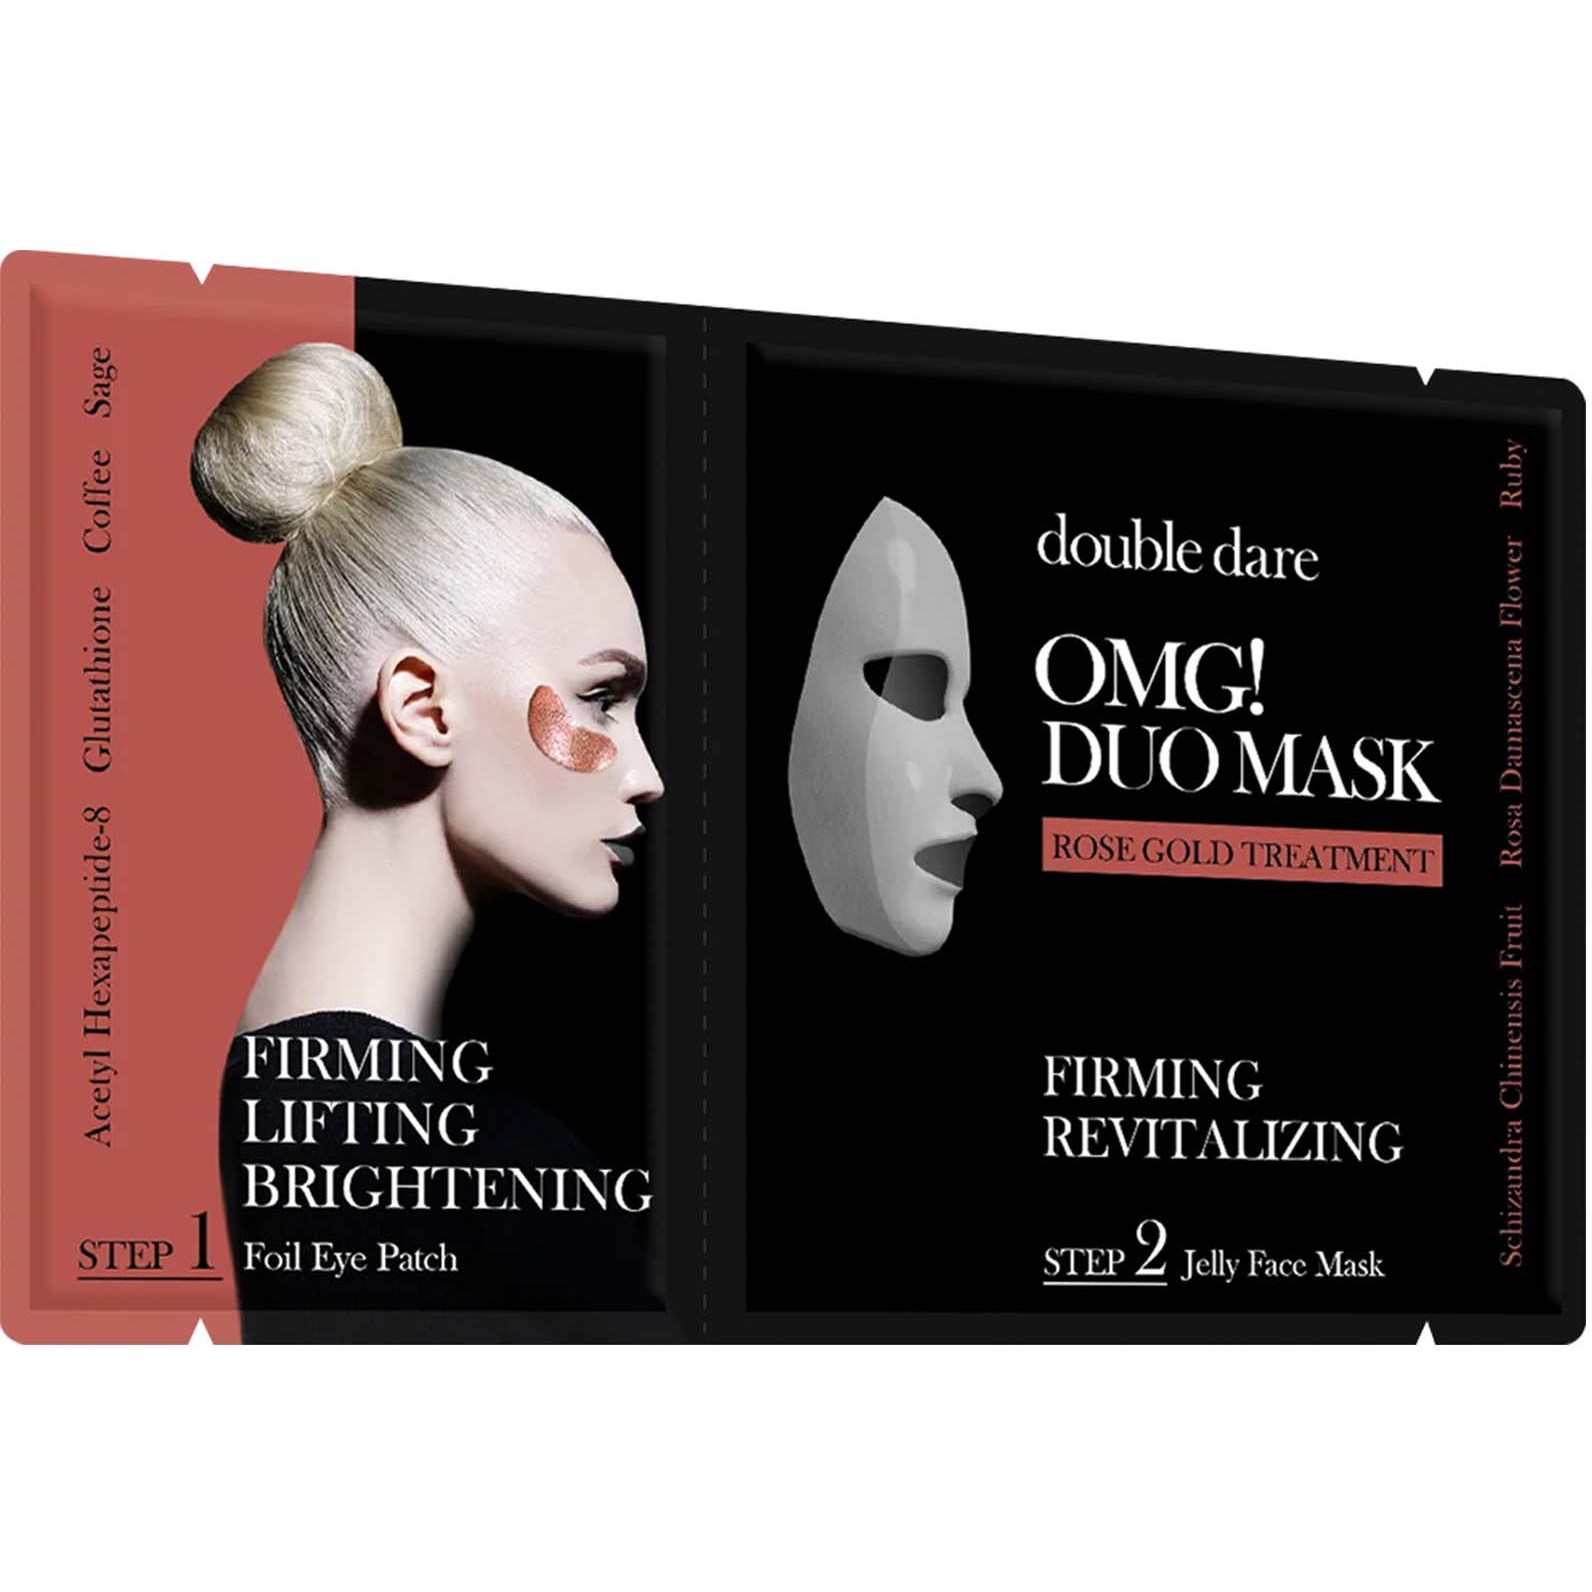 Läs mer om OMG! Double Dare Duo Mask Rose Gold Treatment